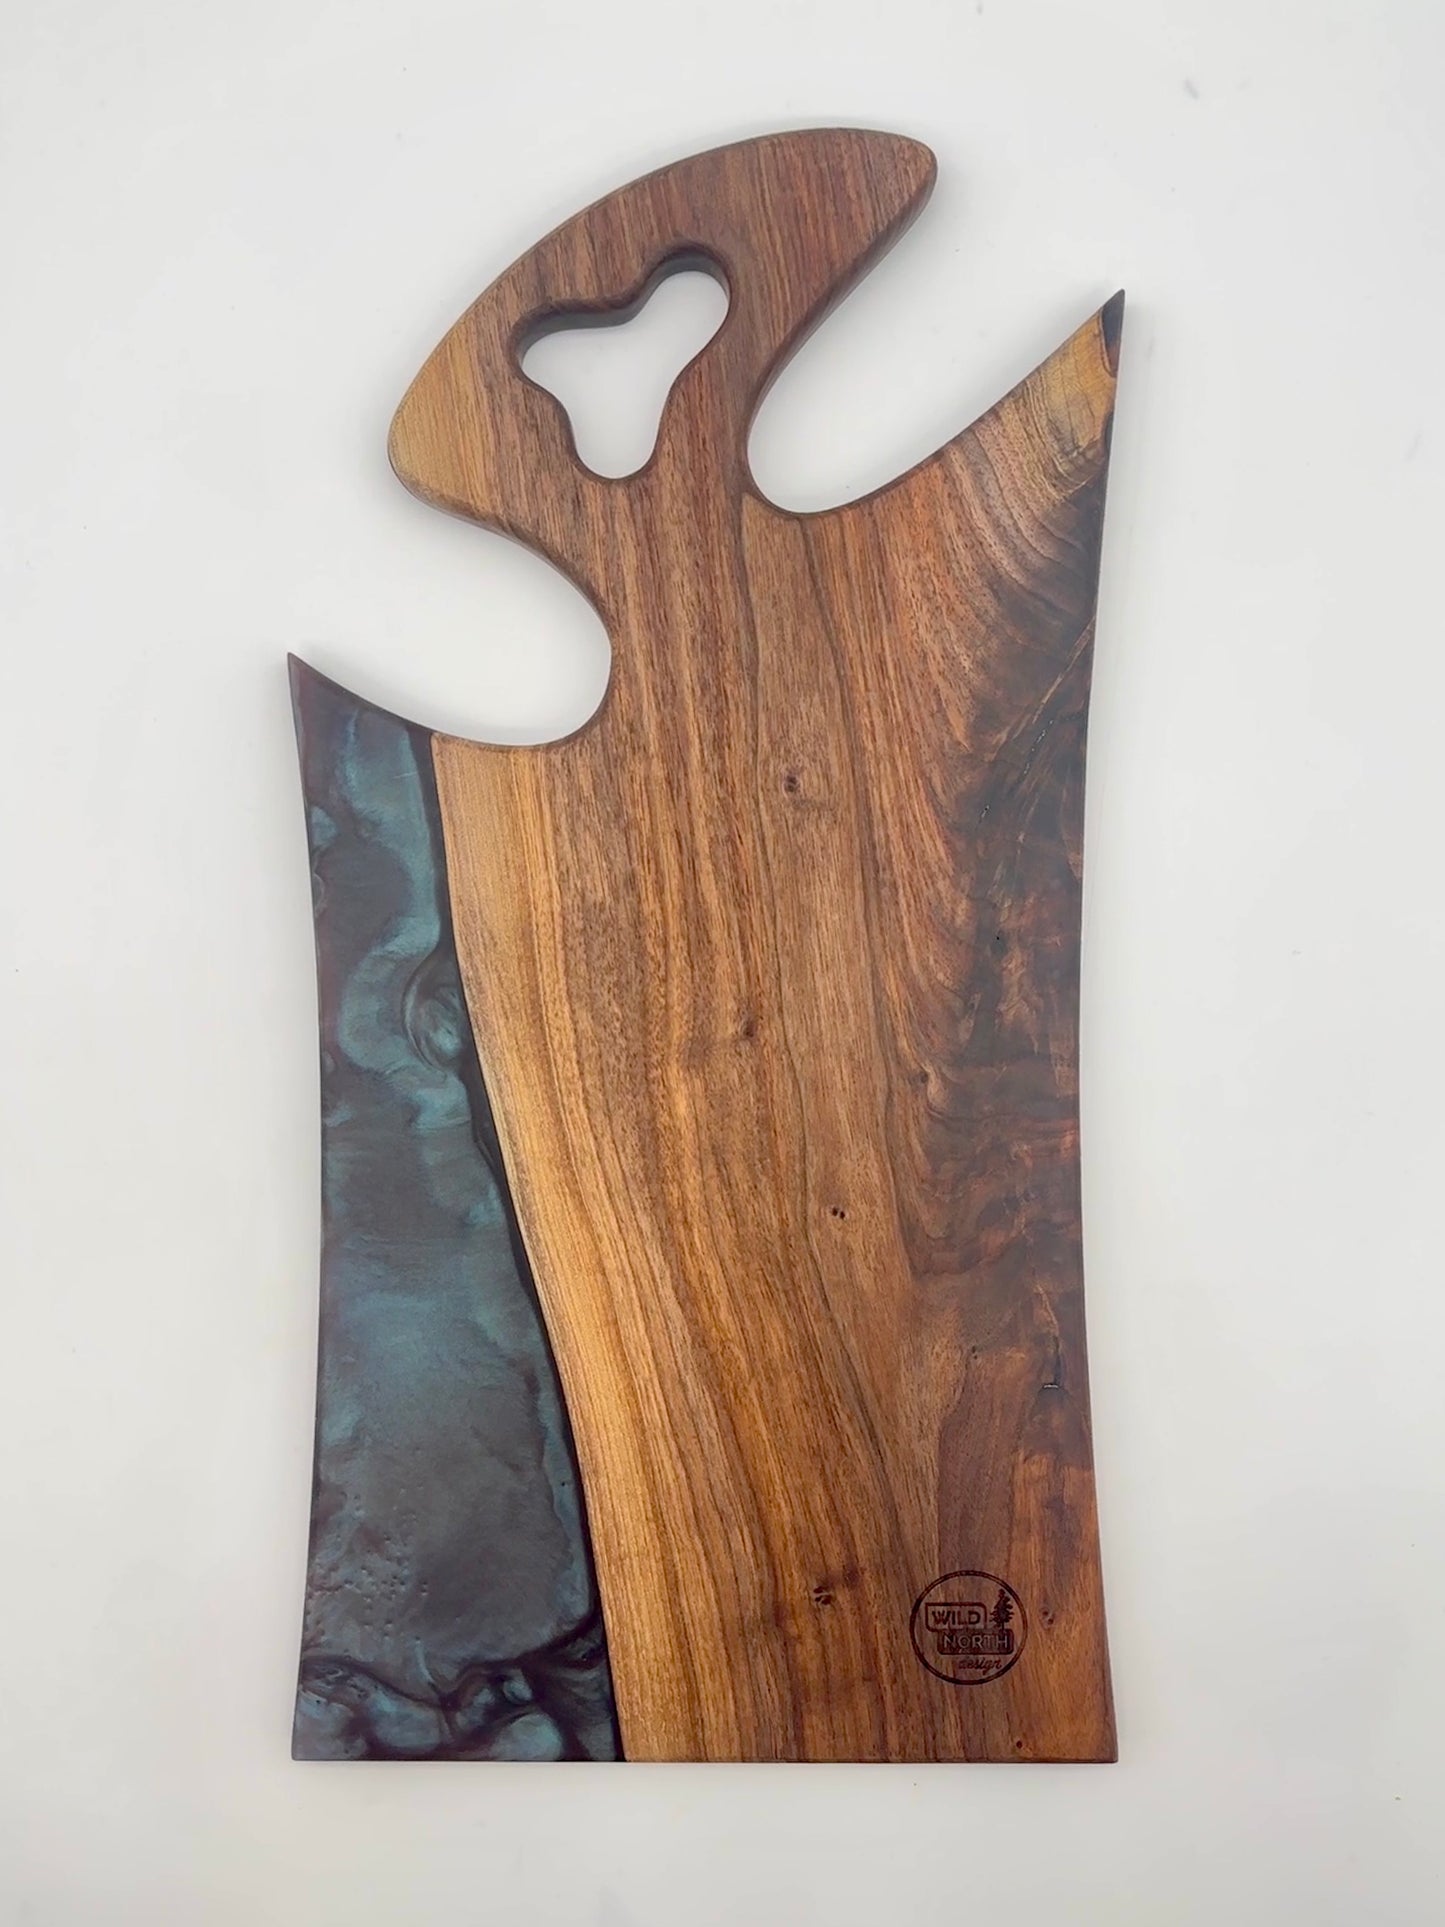 Walnut board with color shifting purple/blue resin